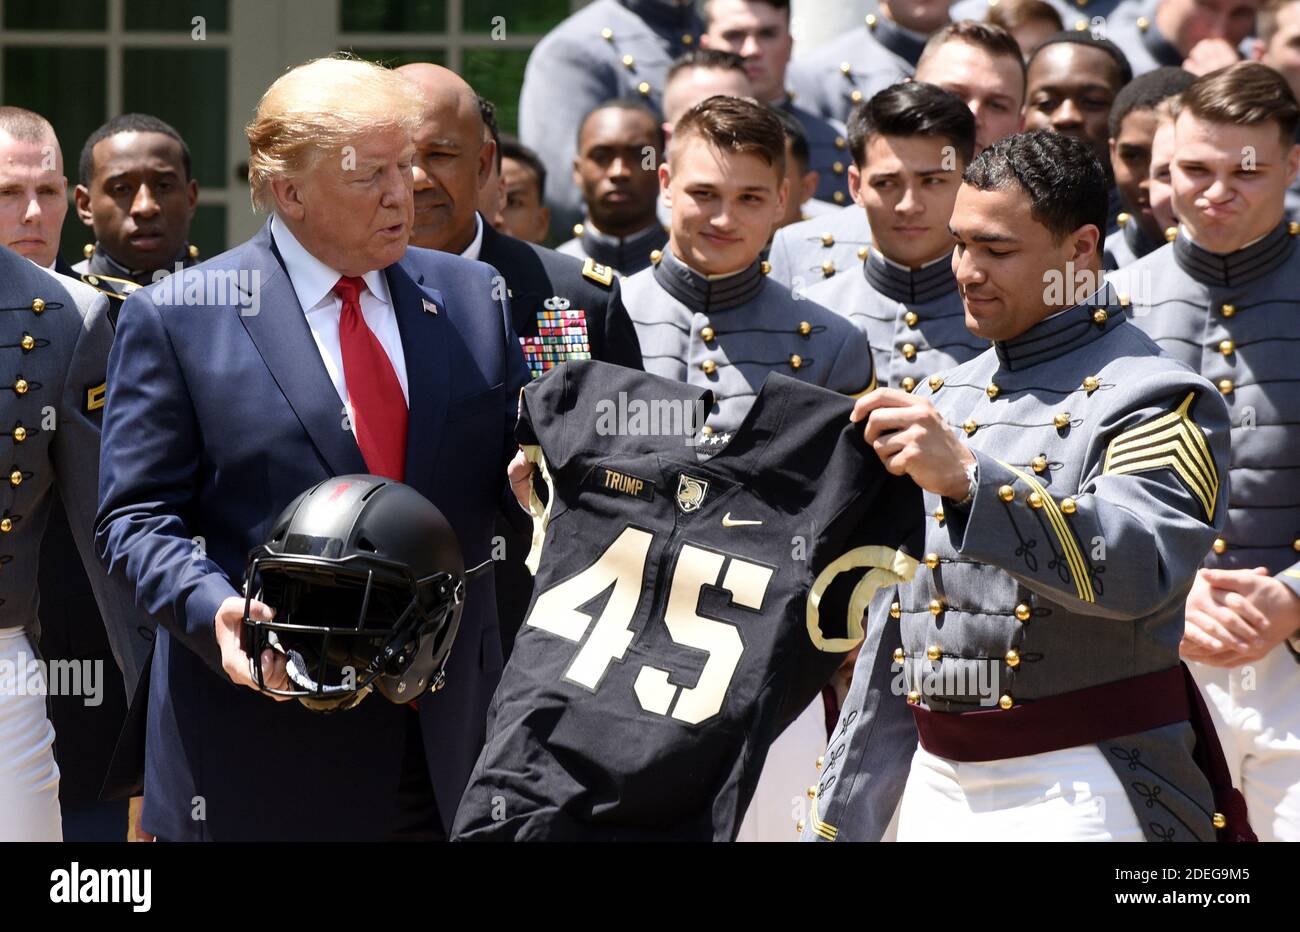 U.S. President Donald Trump is presented with a jersey and a helmet by  running back Darnell Woolfolk (R) during an event with the Army Black  Knights football team from the U.S. Military